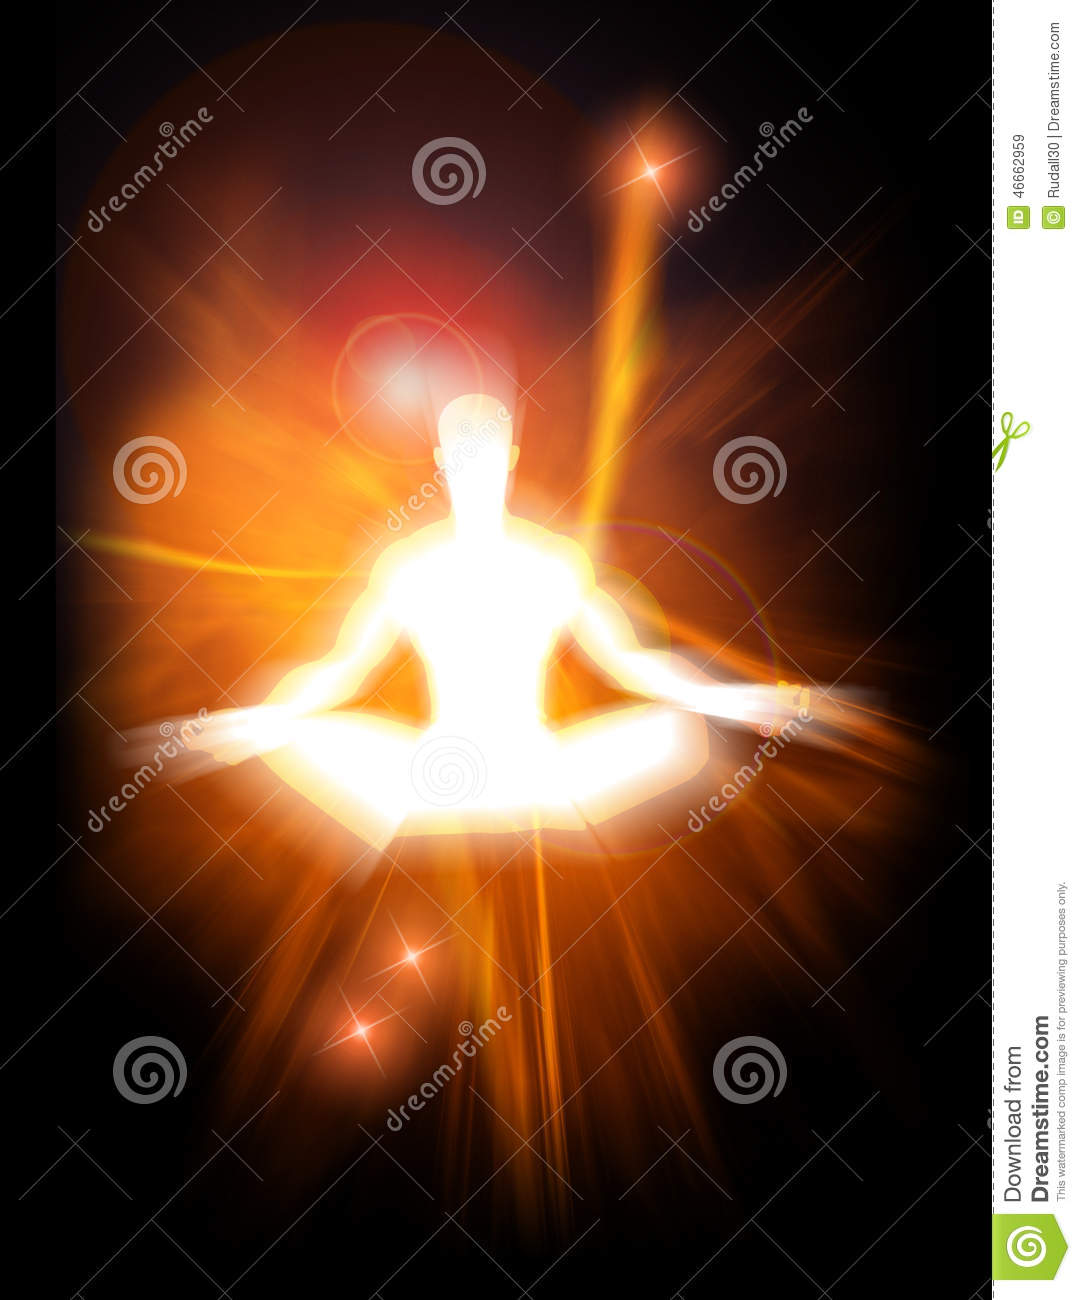 Concept Illustration Of Positive Energy And Enlightenment